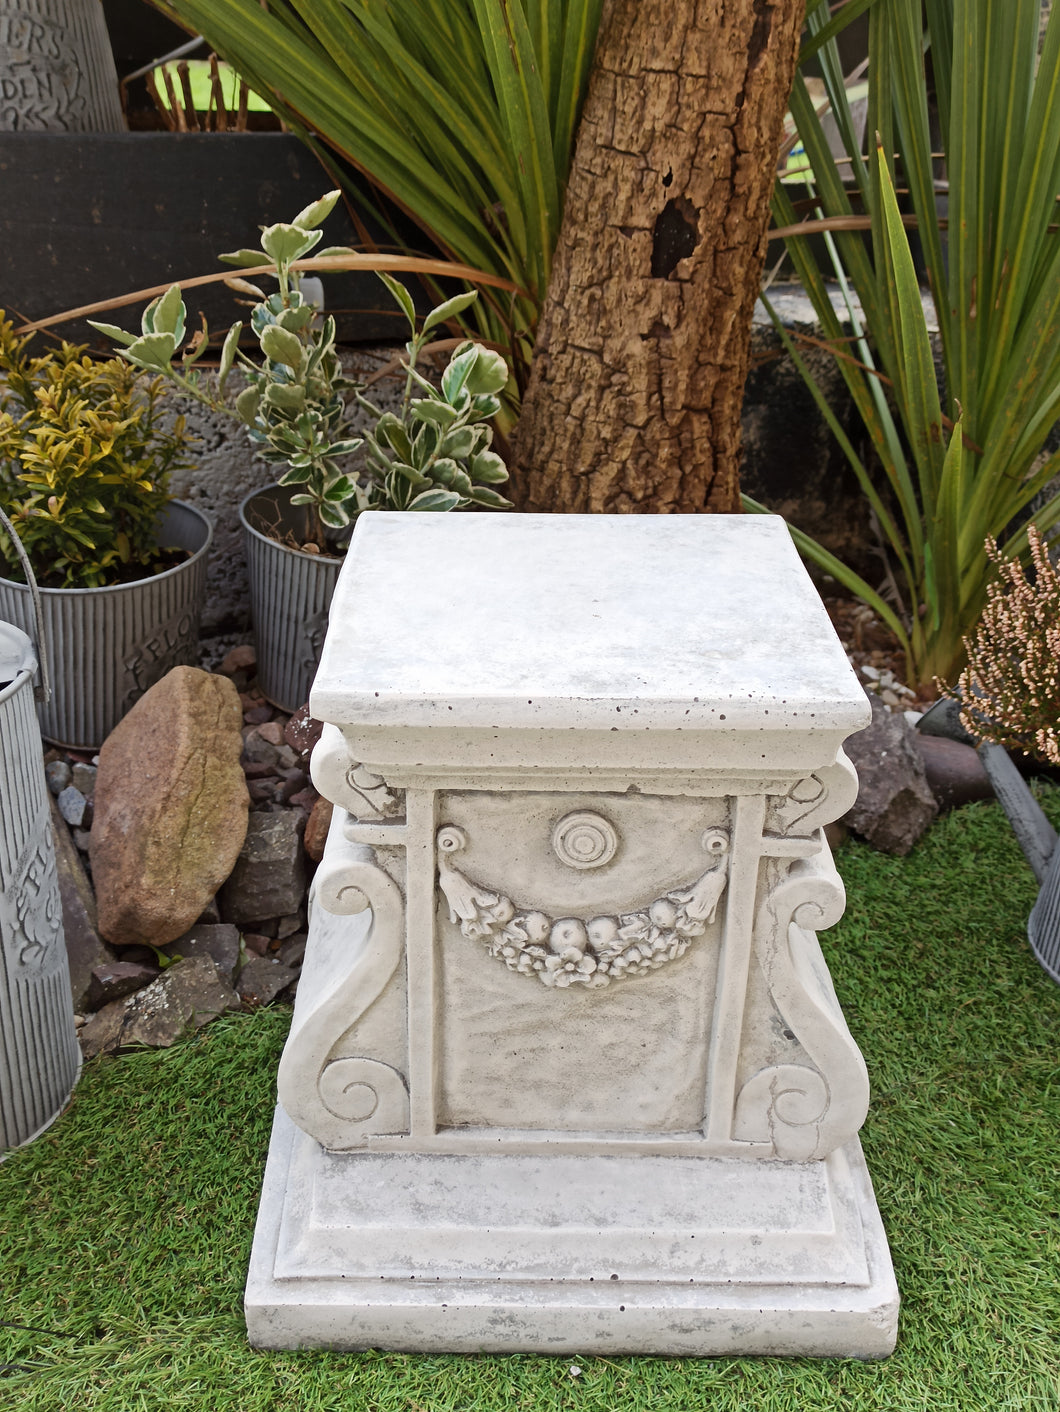 GARDEN SQUARE PLINTH PEDESTAL Aged Stone / STAND ORNAMENT STATUE STAND 27KG